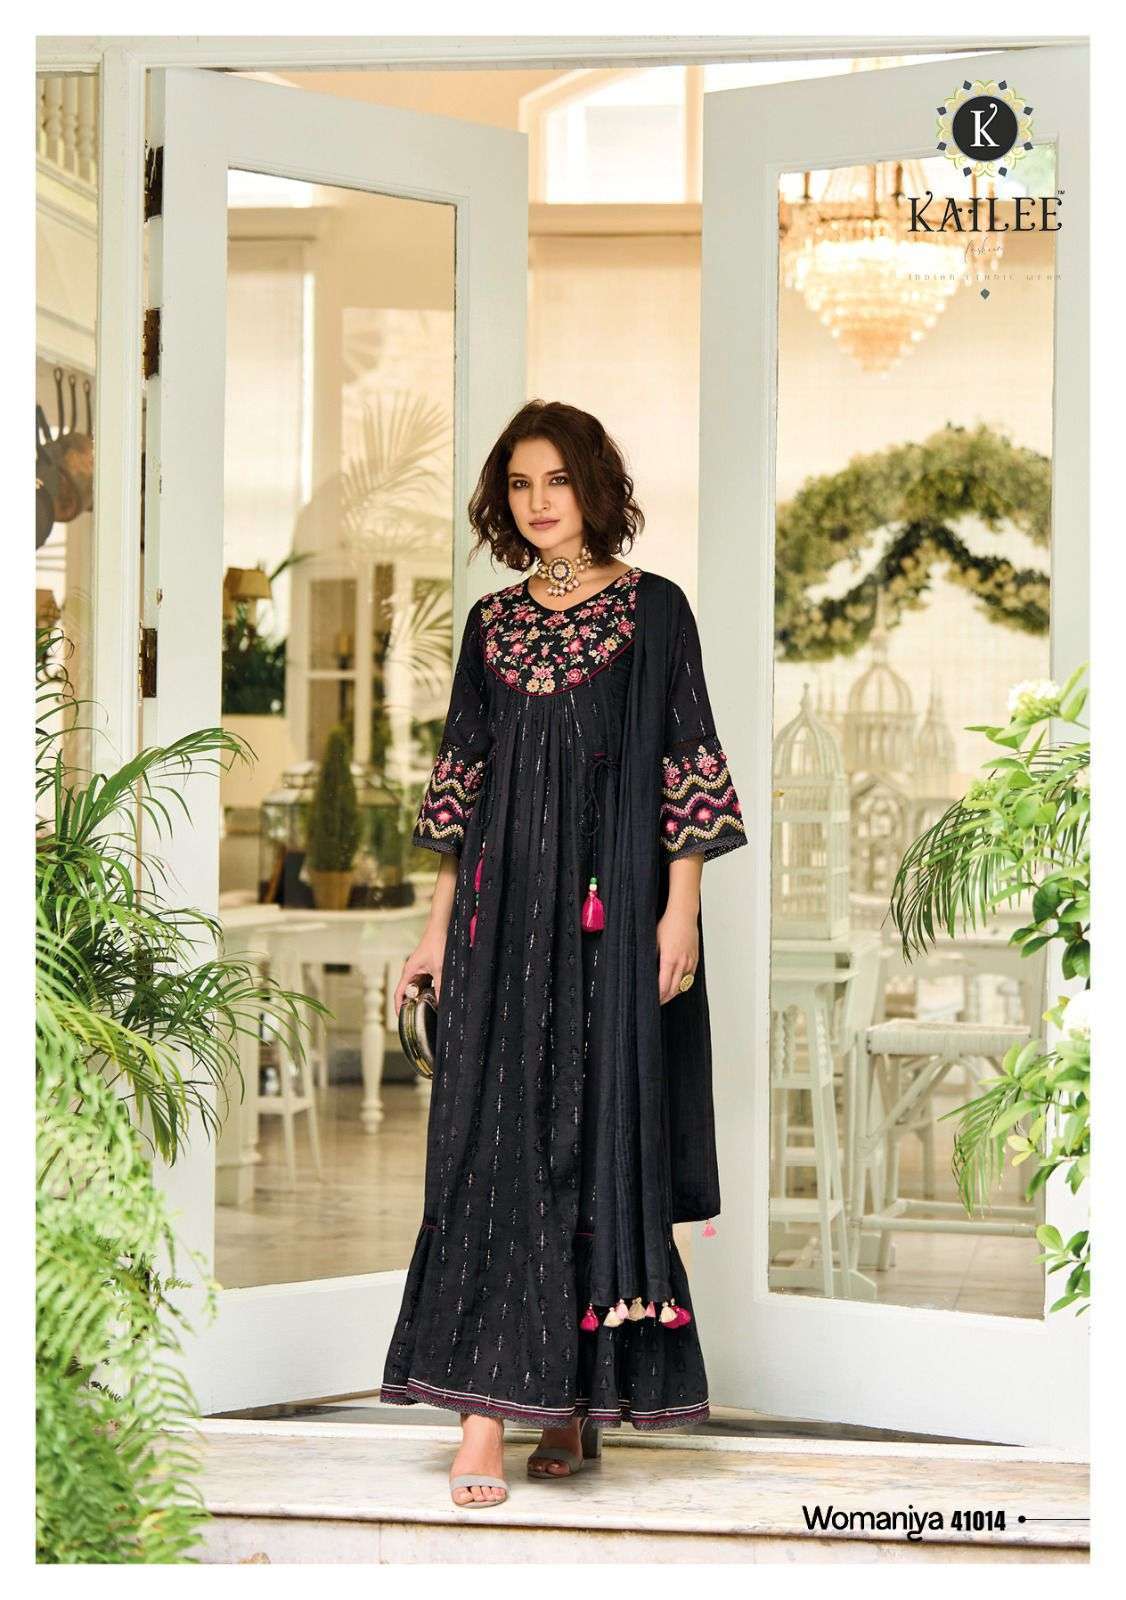 WOMANIYA SERIES 41011 TO 41014 BY KAILEE DESIGNER WITH EMBROIDERY AND HAND WORK COTTON GOWNS ARE AVAILABLE AT WHOLESALE PRICE